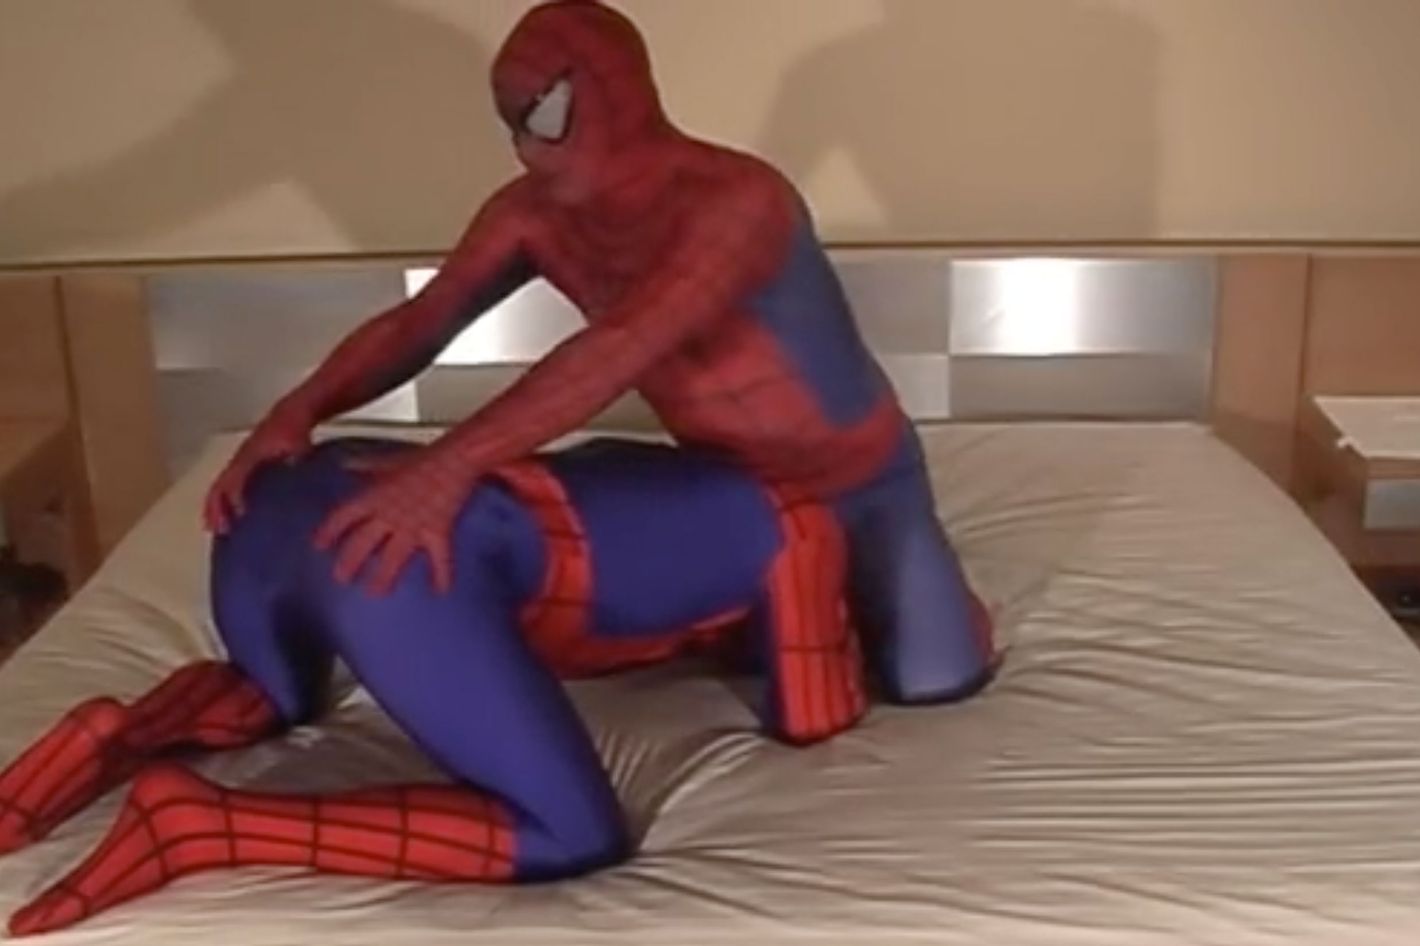 Spiderman Porn Movie - Who Made the Viral Spider-Man Spanking Video?